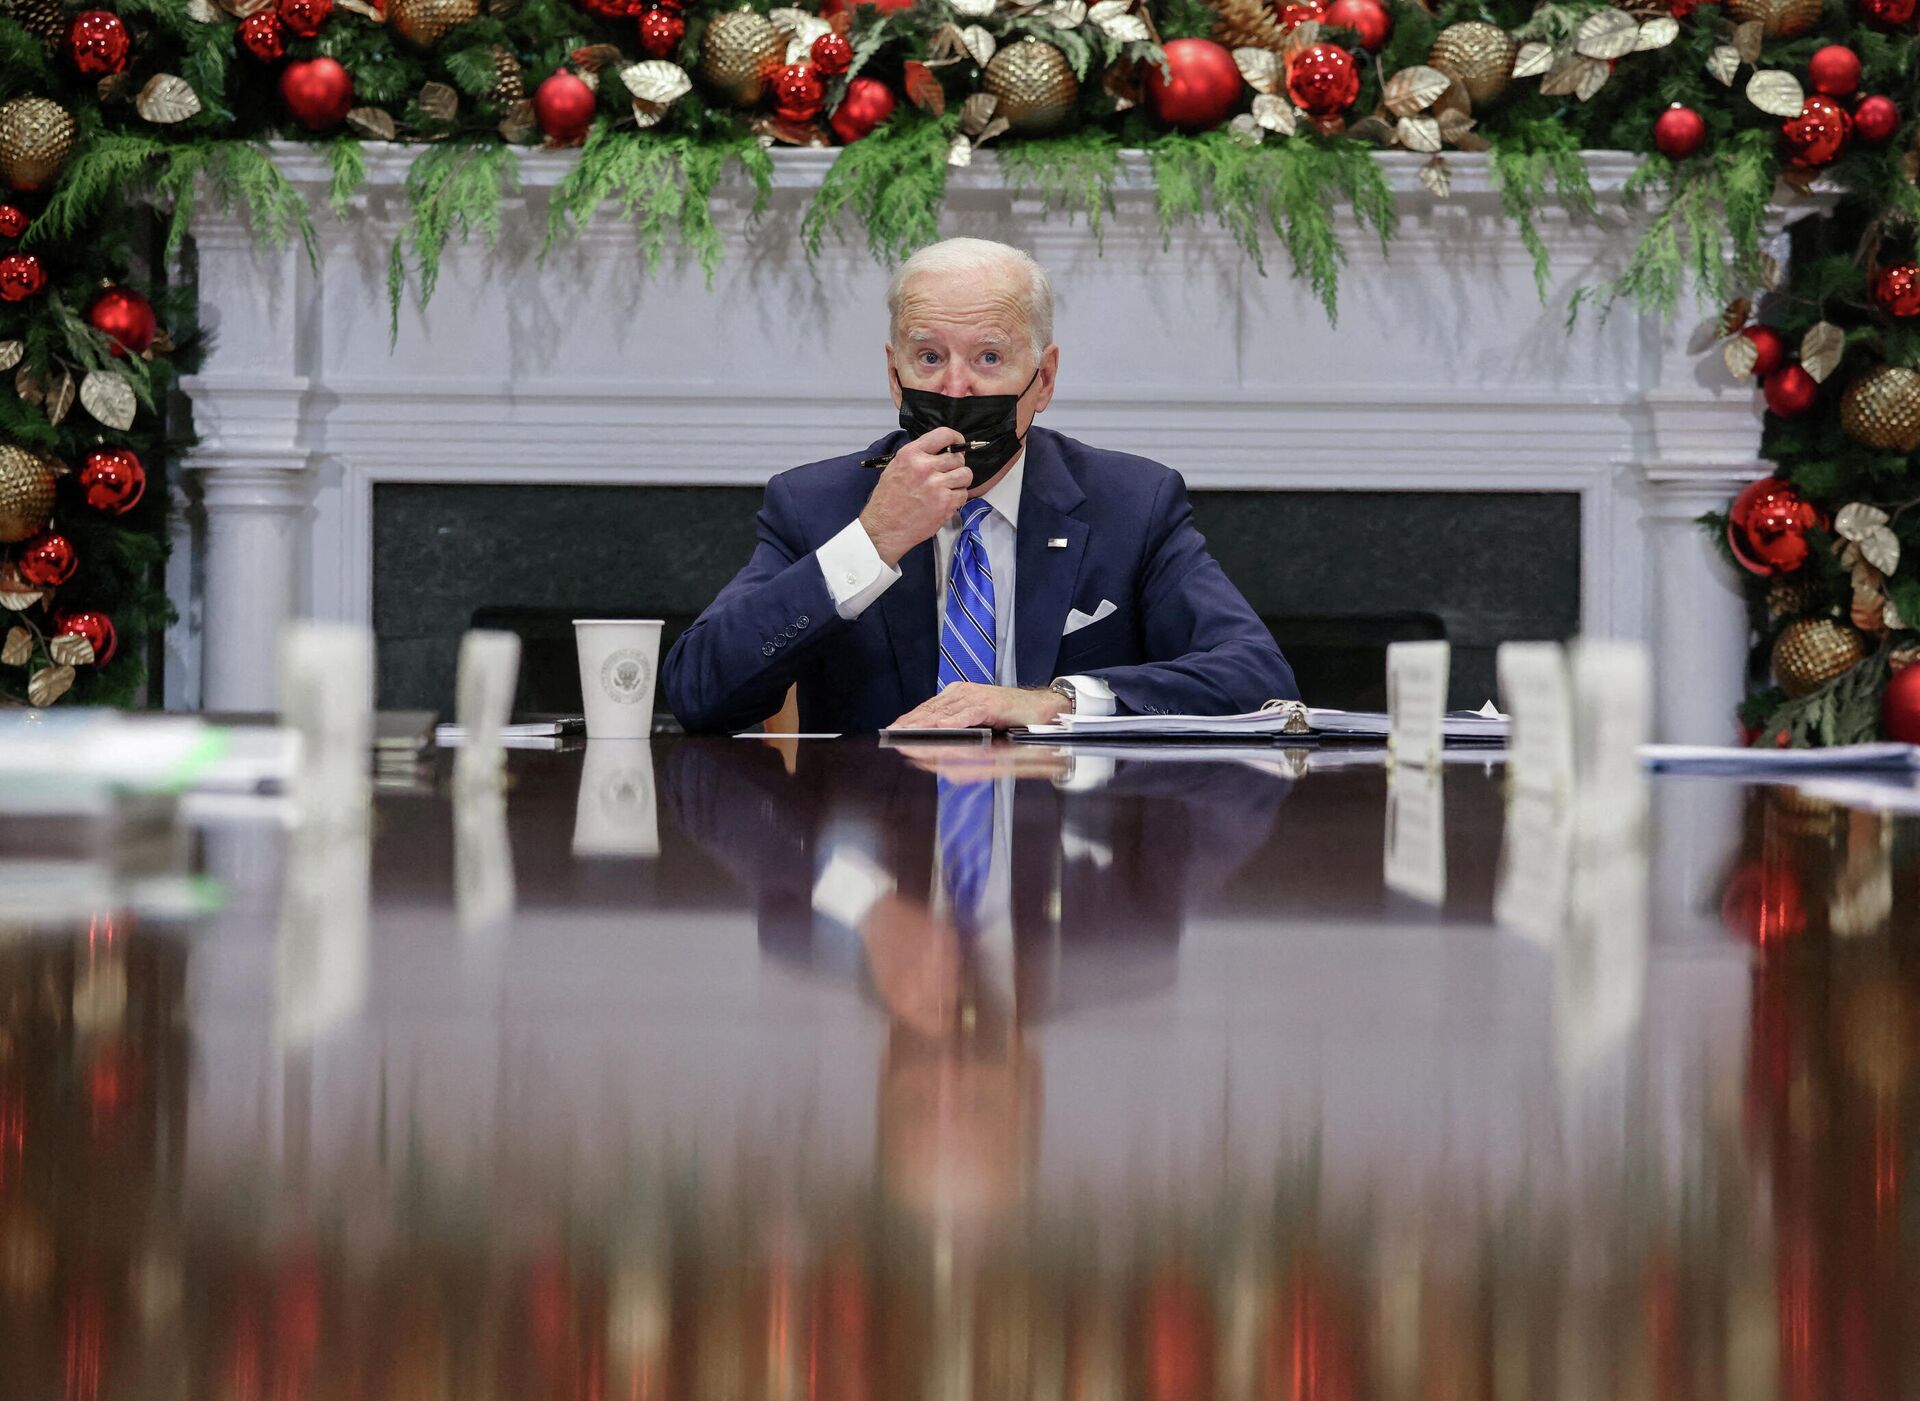 U.S. President Joe Biden meets with members of the White House COVID-19 Response Team on the latest developments related to the Omicron variant in the Roosevelt Room in the White House in Washington, U.S., December 16, 2021 - Sputnik International, 1920, 27.12.2021